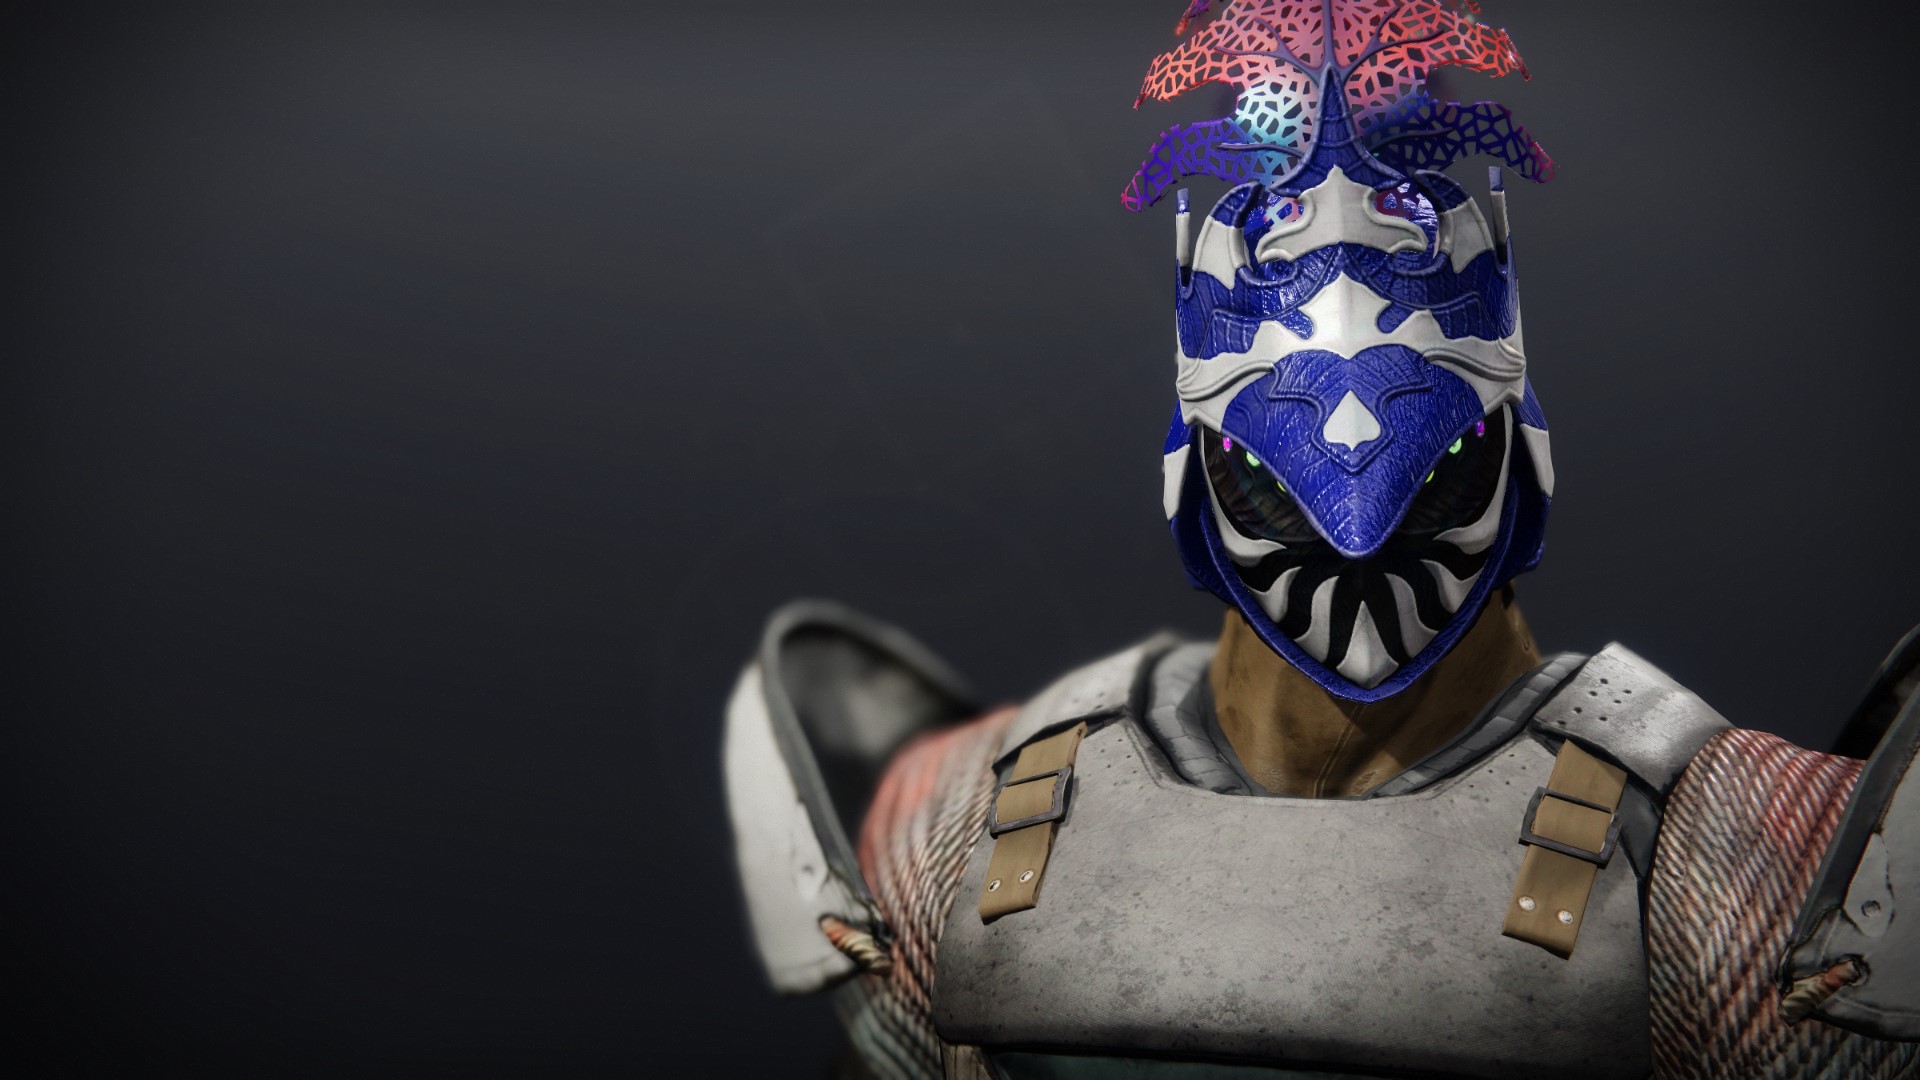 An in-game render of the Helm of Agony.